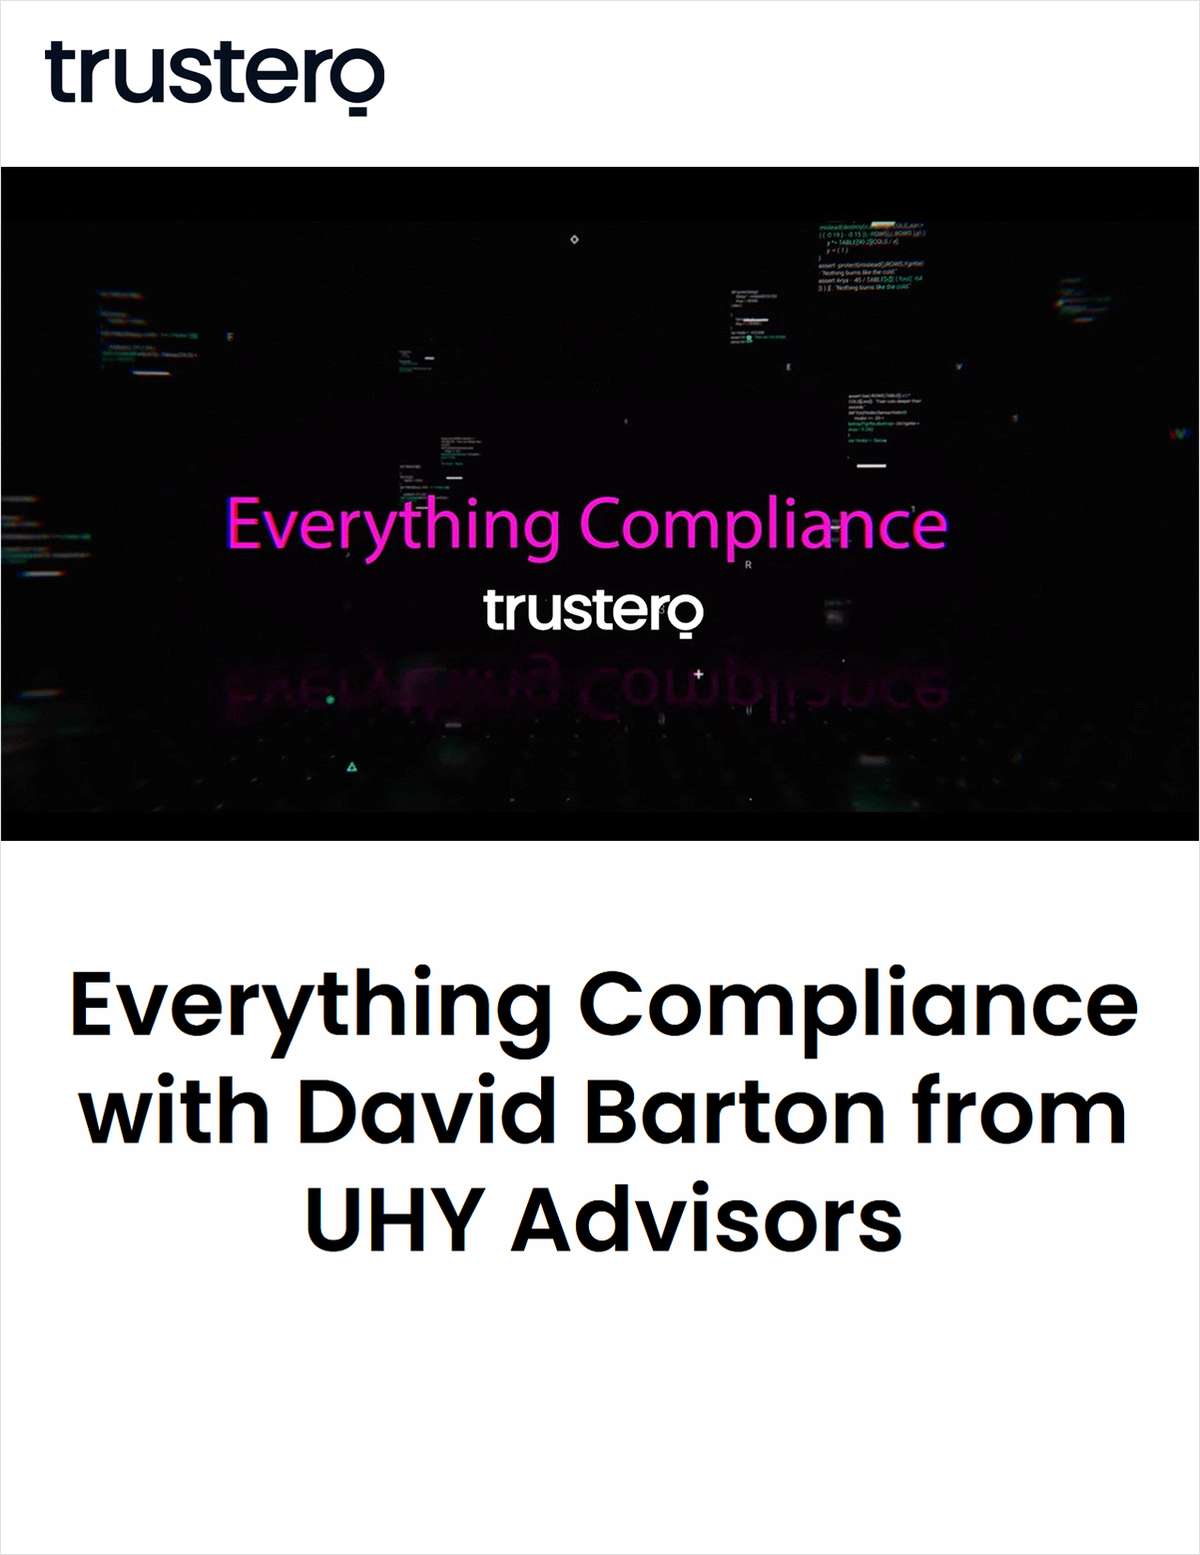 Trustero Video: Everything Compliance with David Barton from UHY Advisors